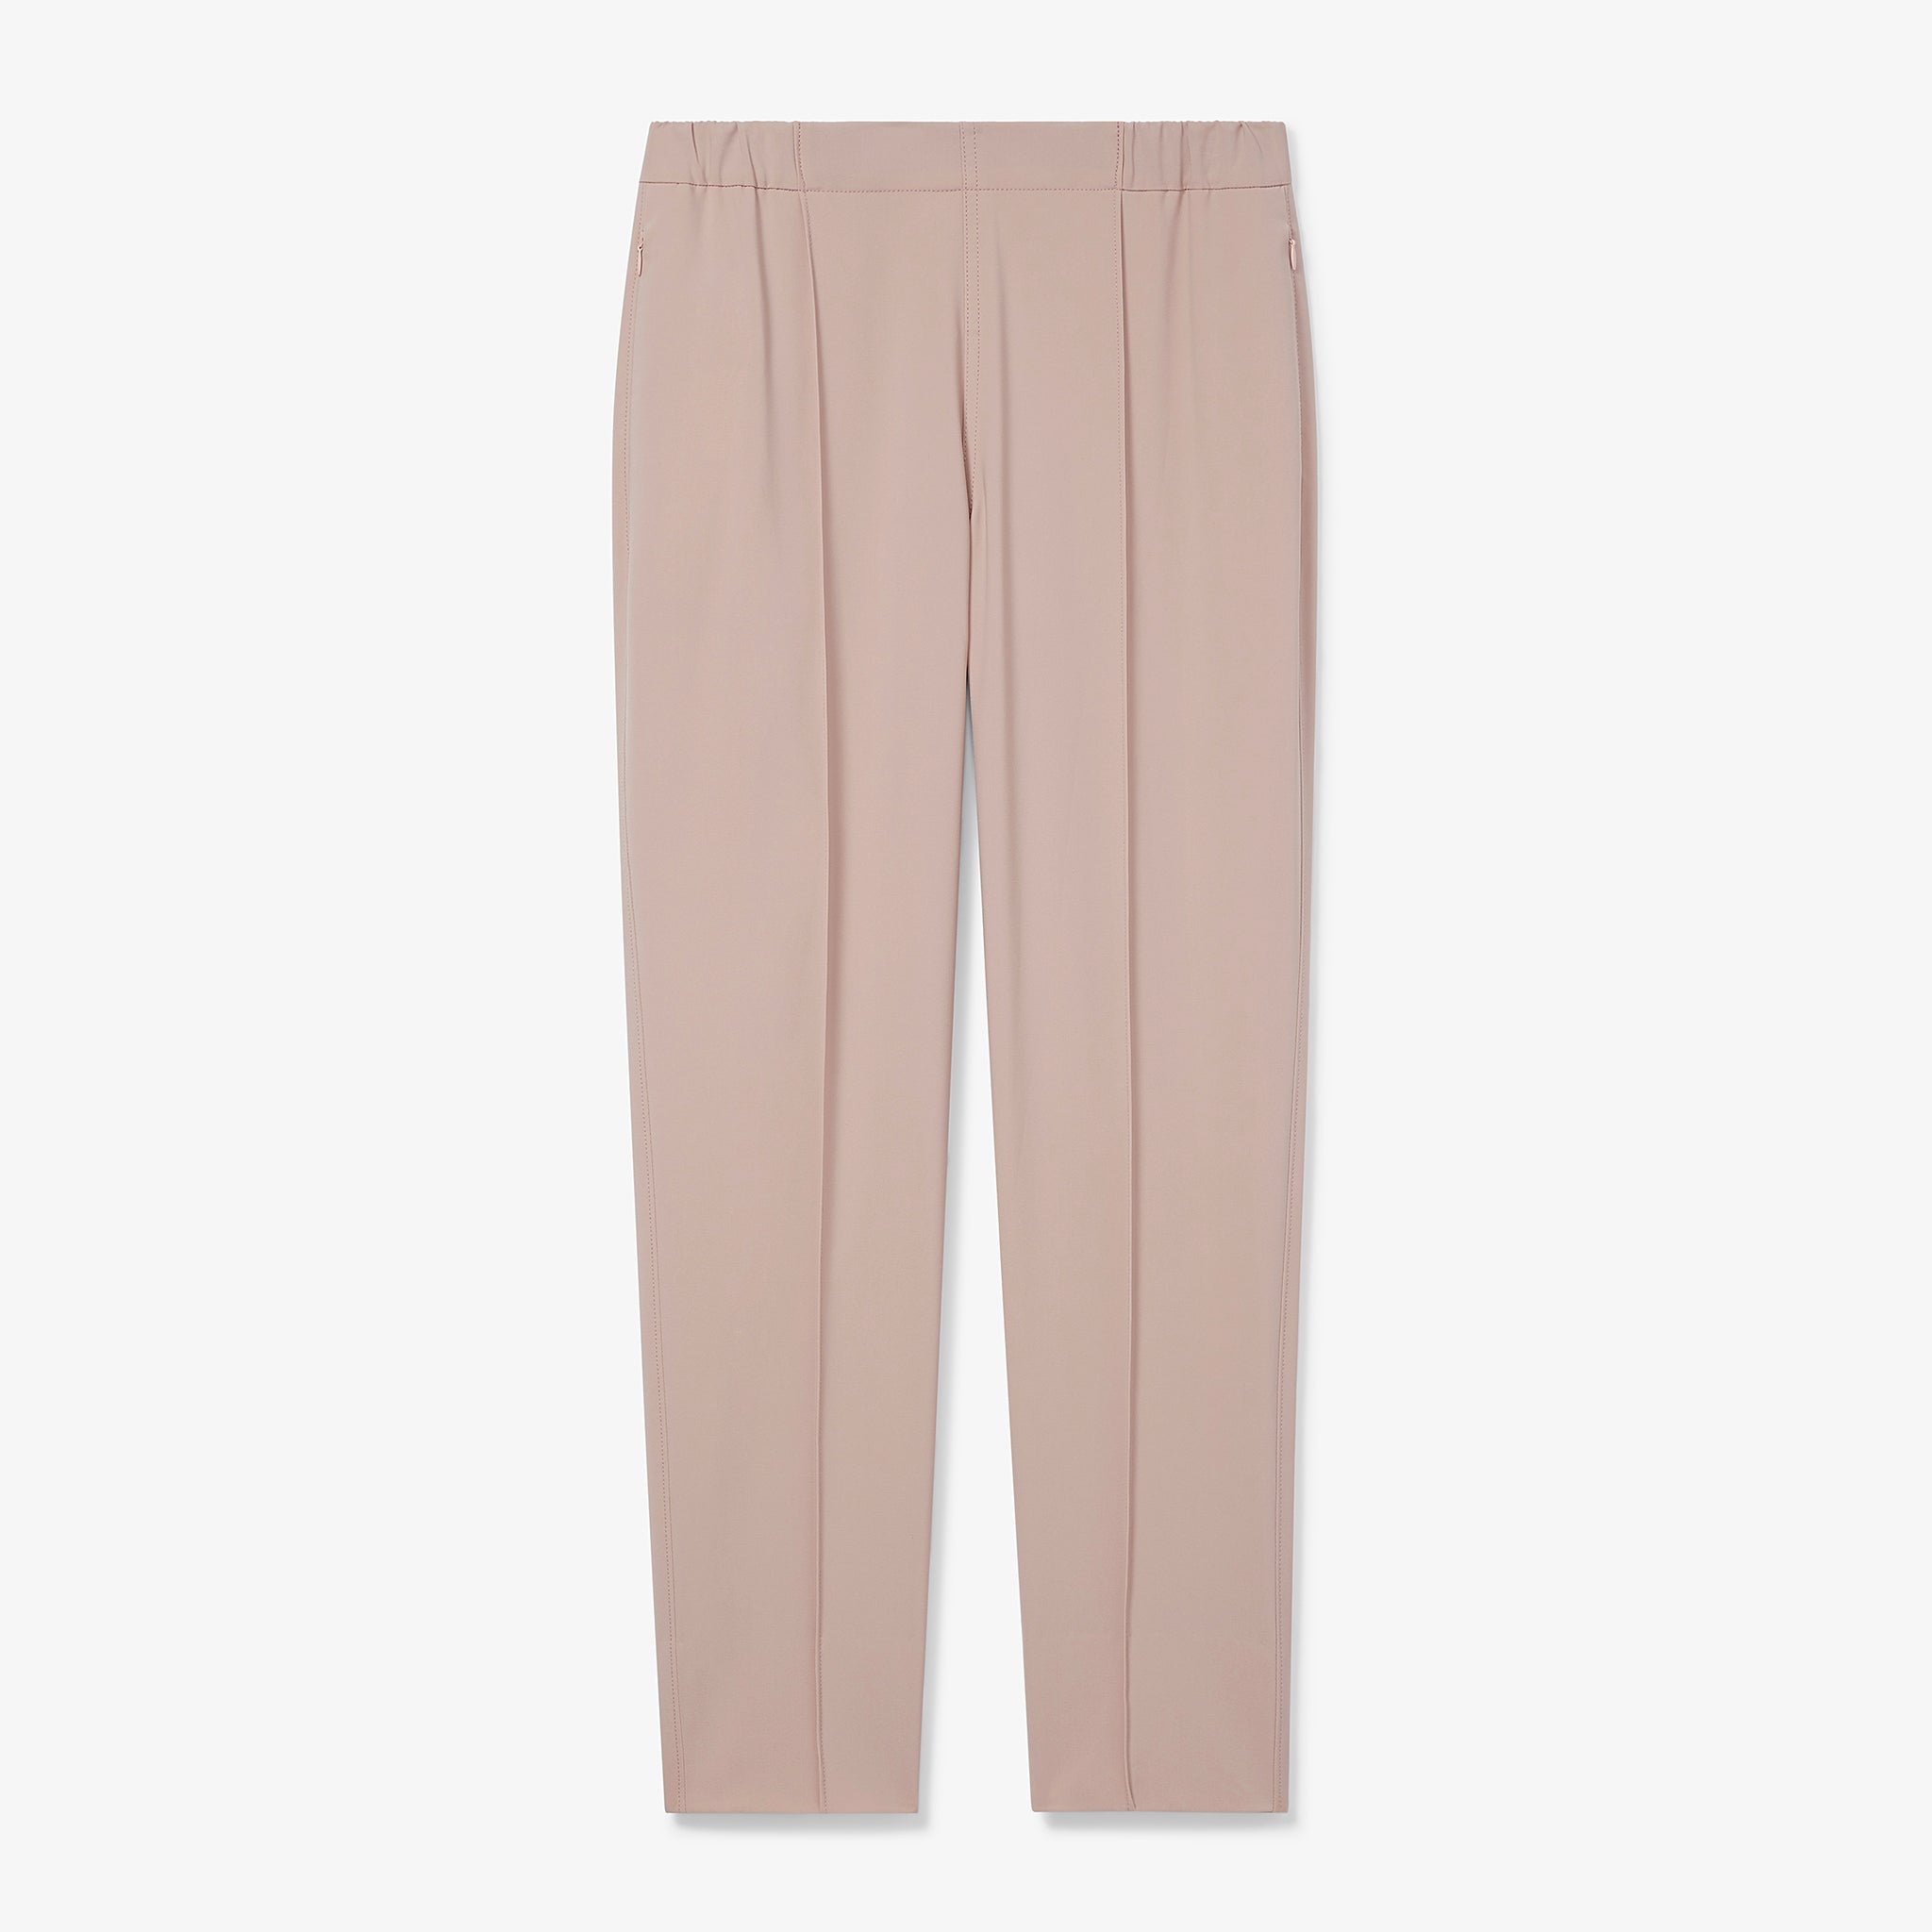 Packshot image of the Colby jogger in Blush